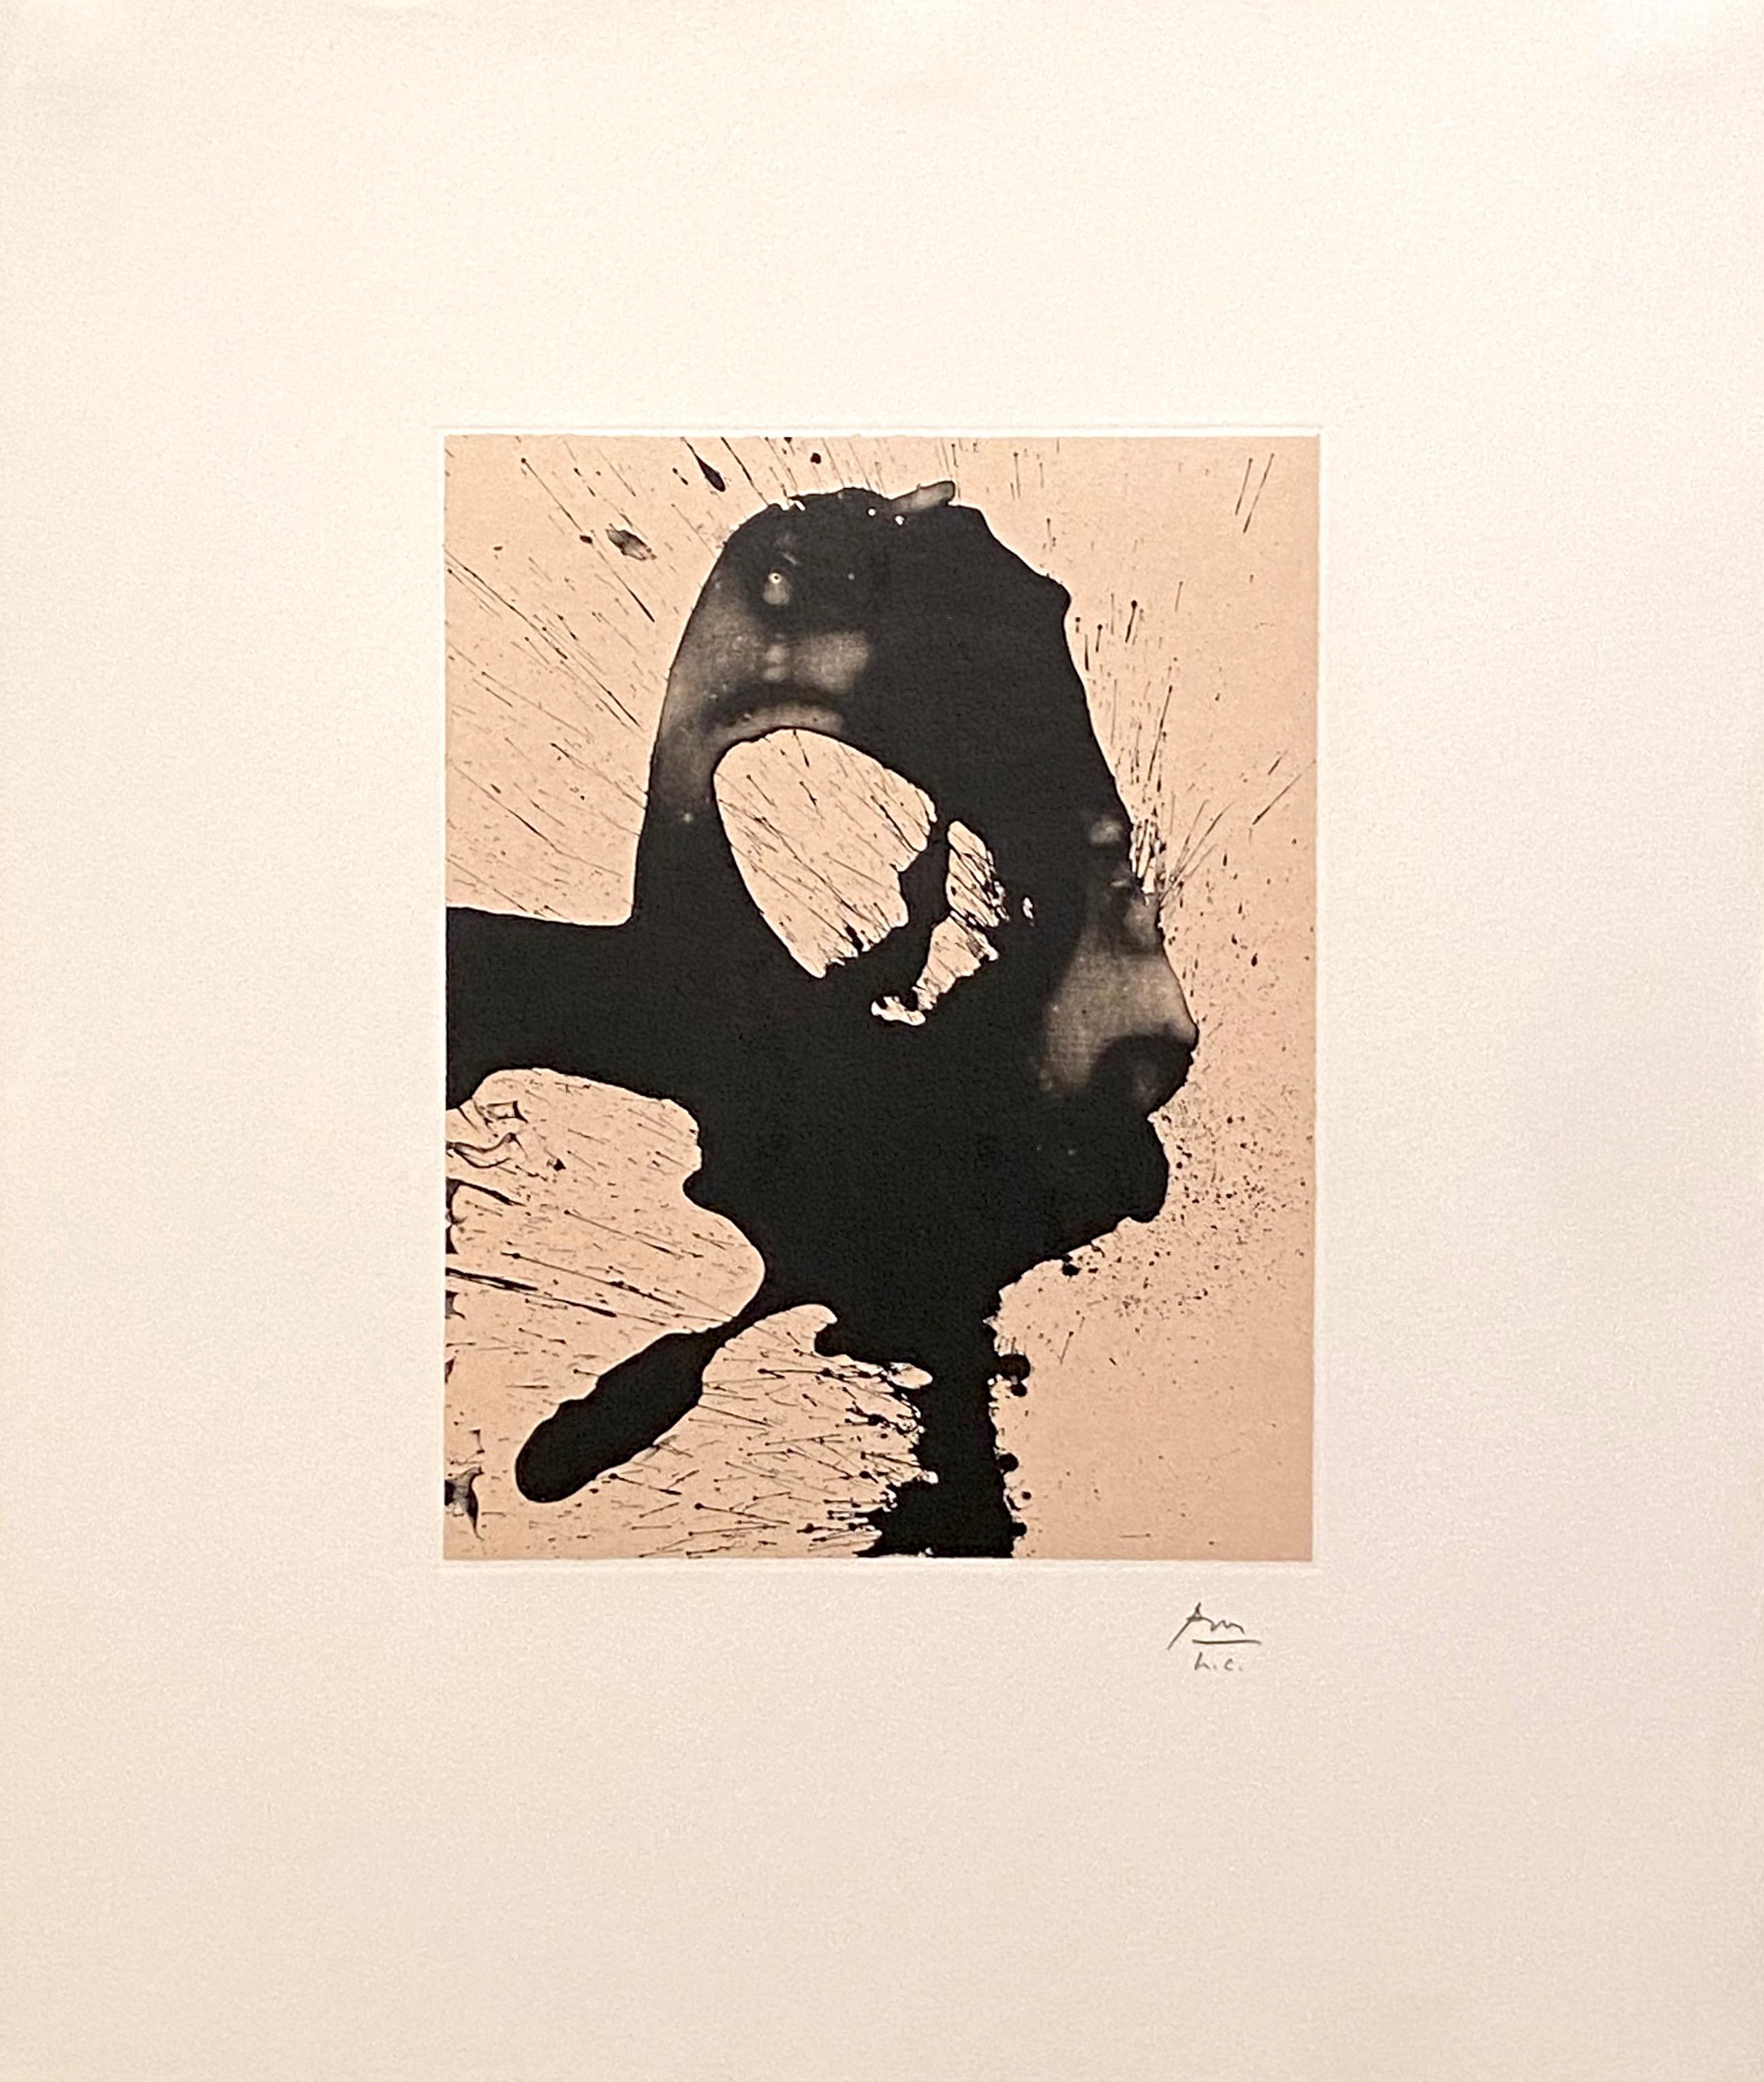 One of three prints from the Octavio Paz suite, Robert Motherwell’s, Nocturne I is a masterful work of printed art.  An original lithograph created on handmade paper laid then onto Arches paper, the print is hand-monogrammed by the artist in pencil,